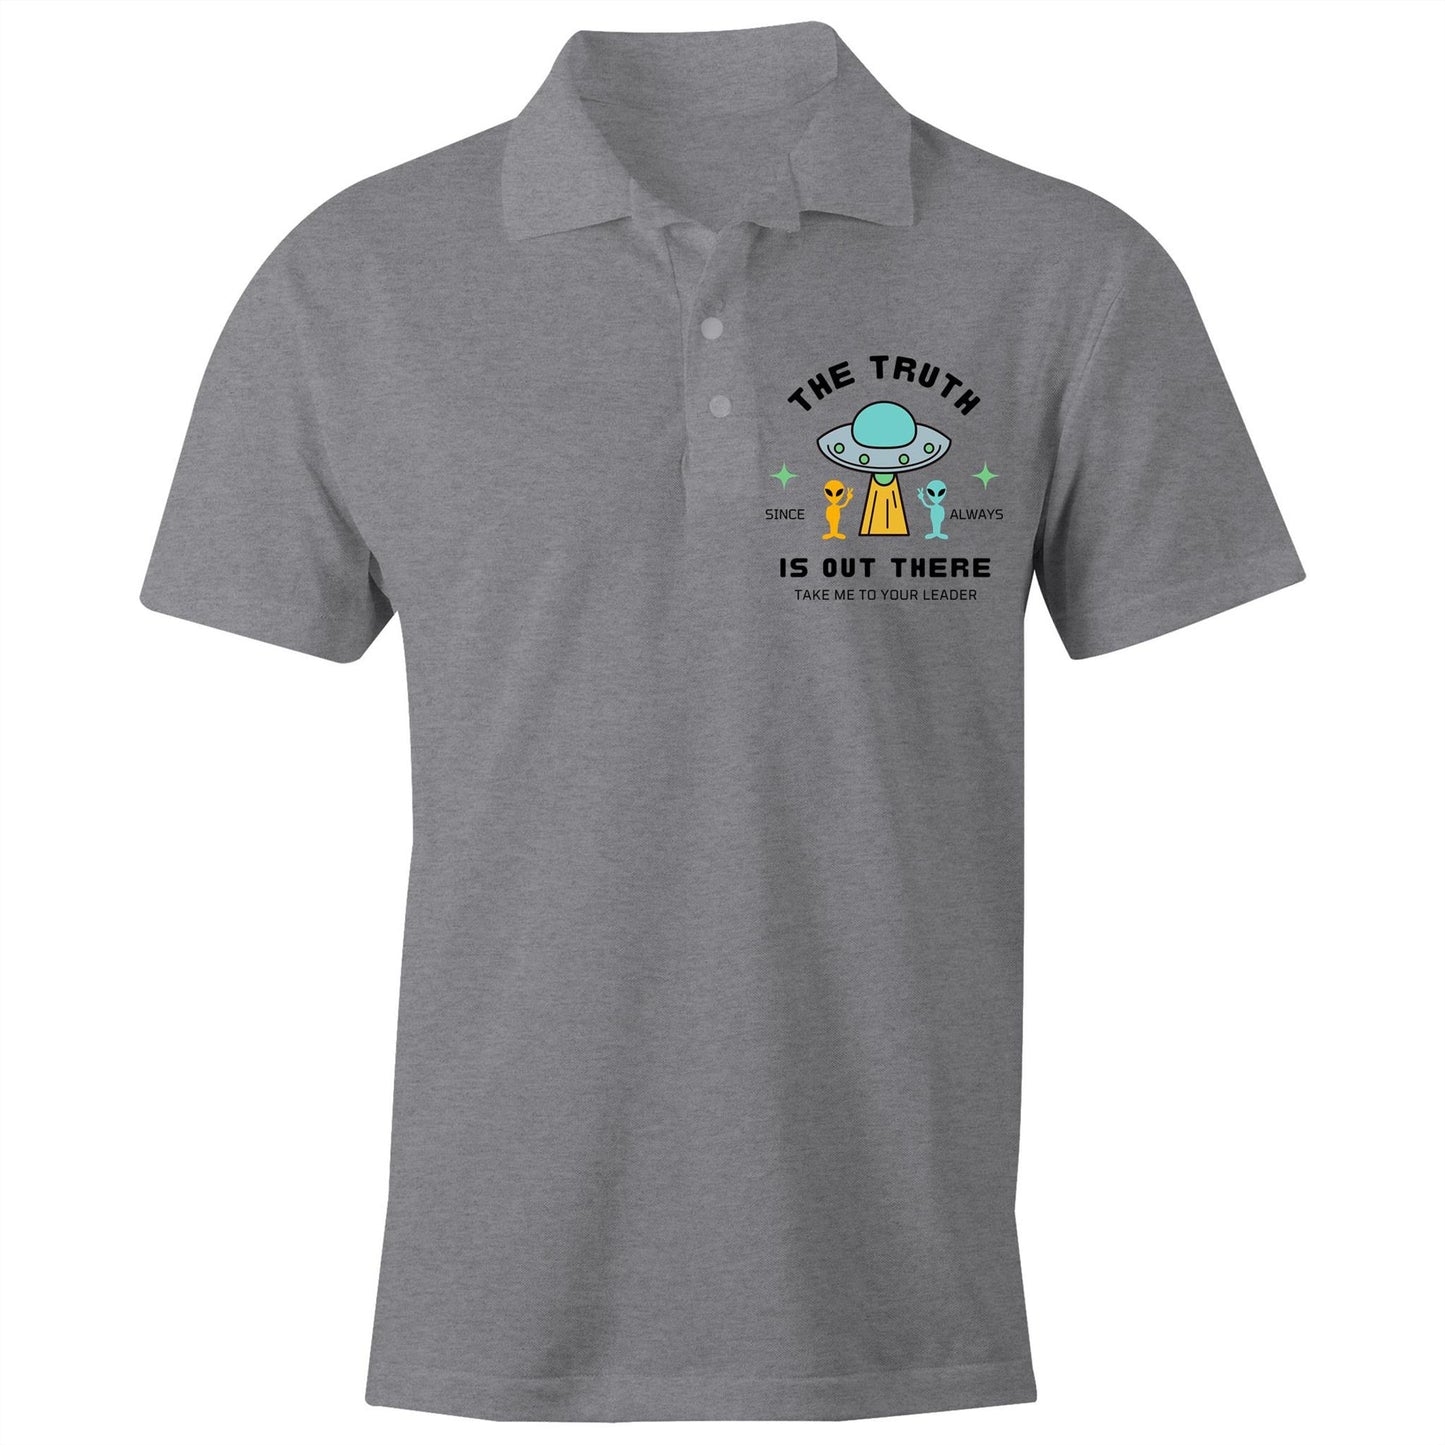 The Truth Is Out There - Chad S/S Polo Shirt, Printed Grey Marle Polo Shirt Sci Fi